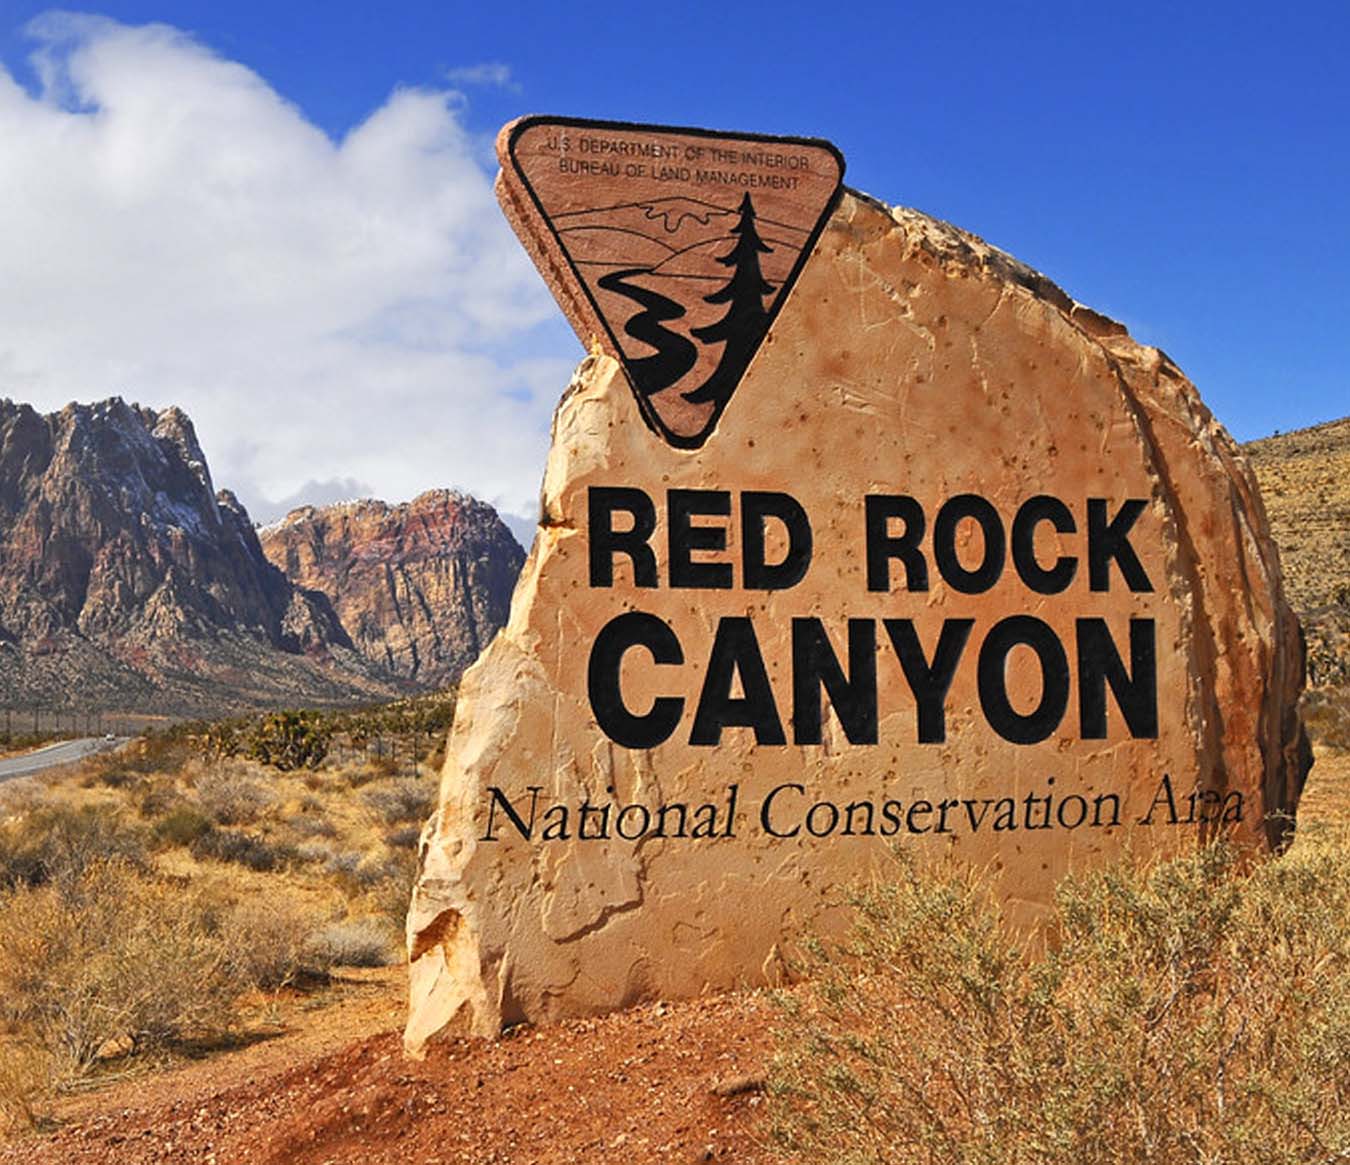 Things to Do in Las Vegas - Red Rock Canyon